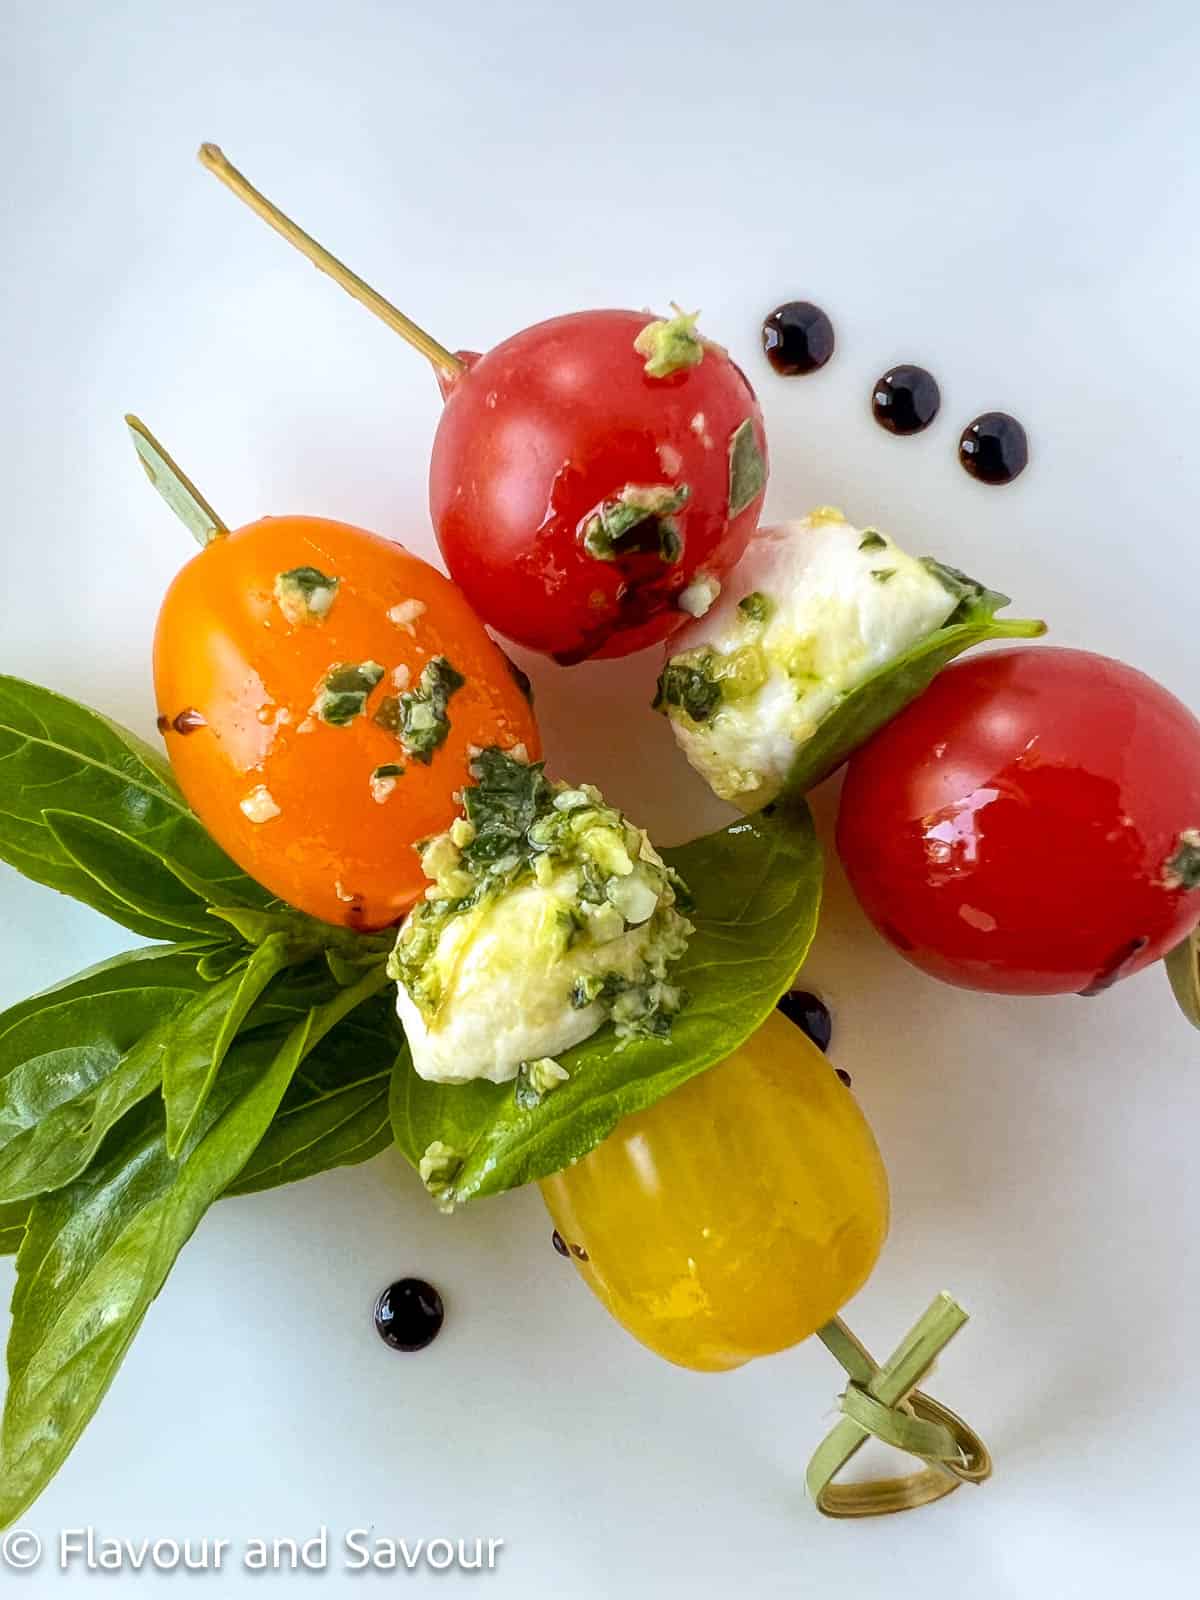 Pesto Caprese Skewers made with cherry tomatoes, bocconcini balls, pesto and a basil lear.